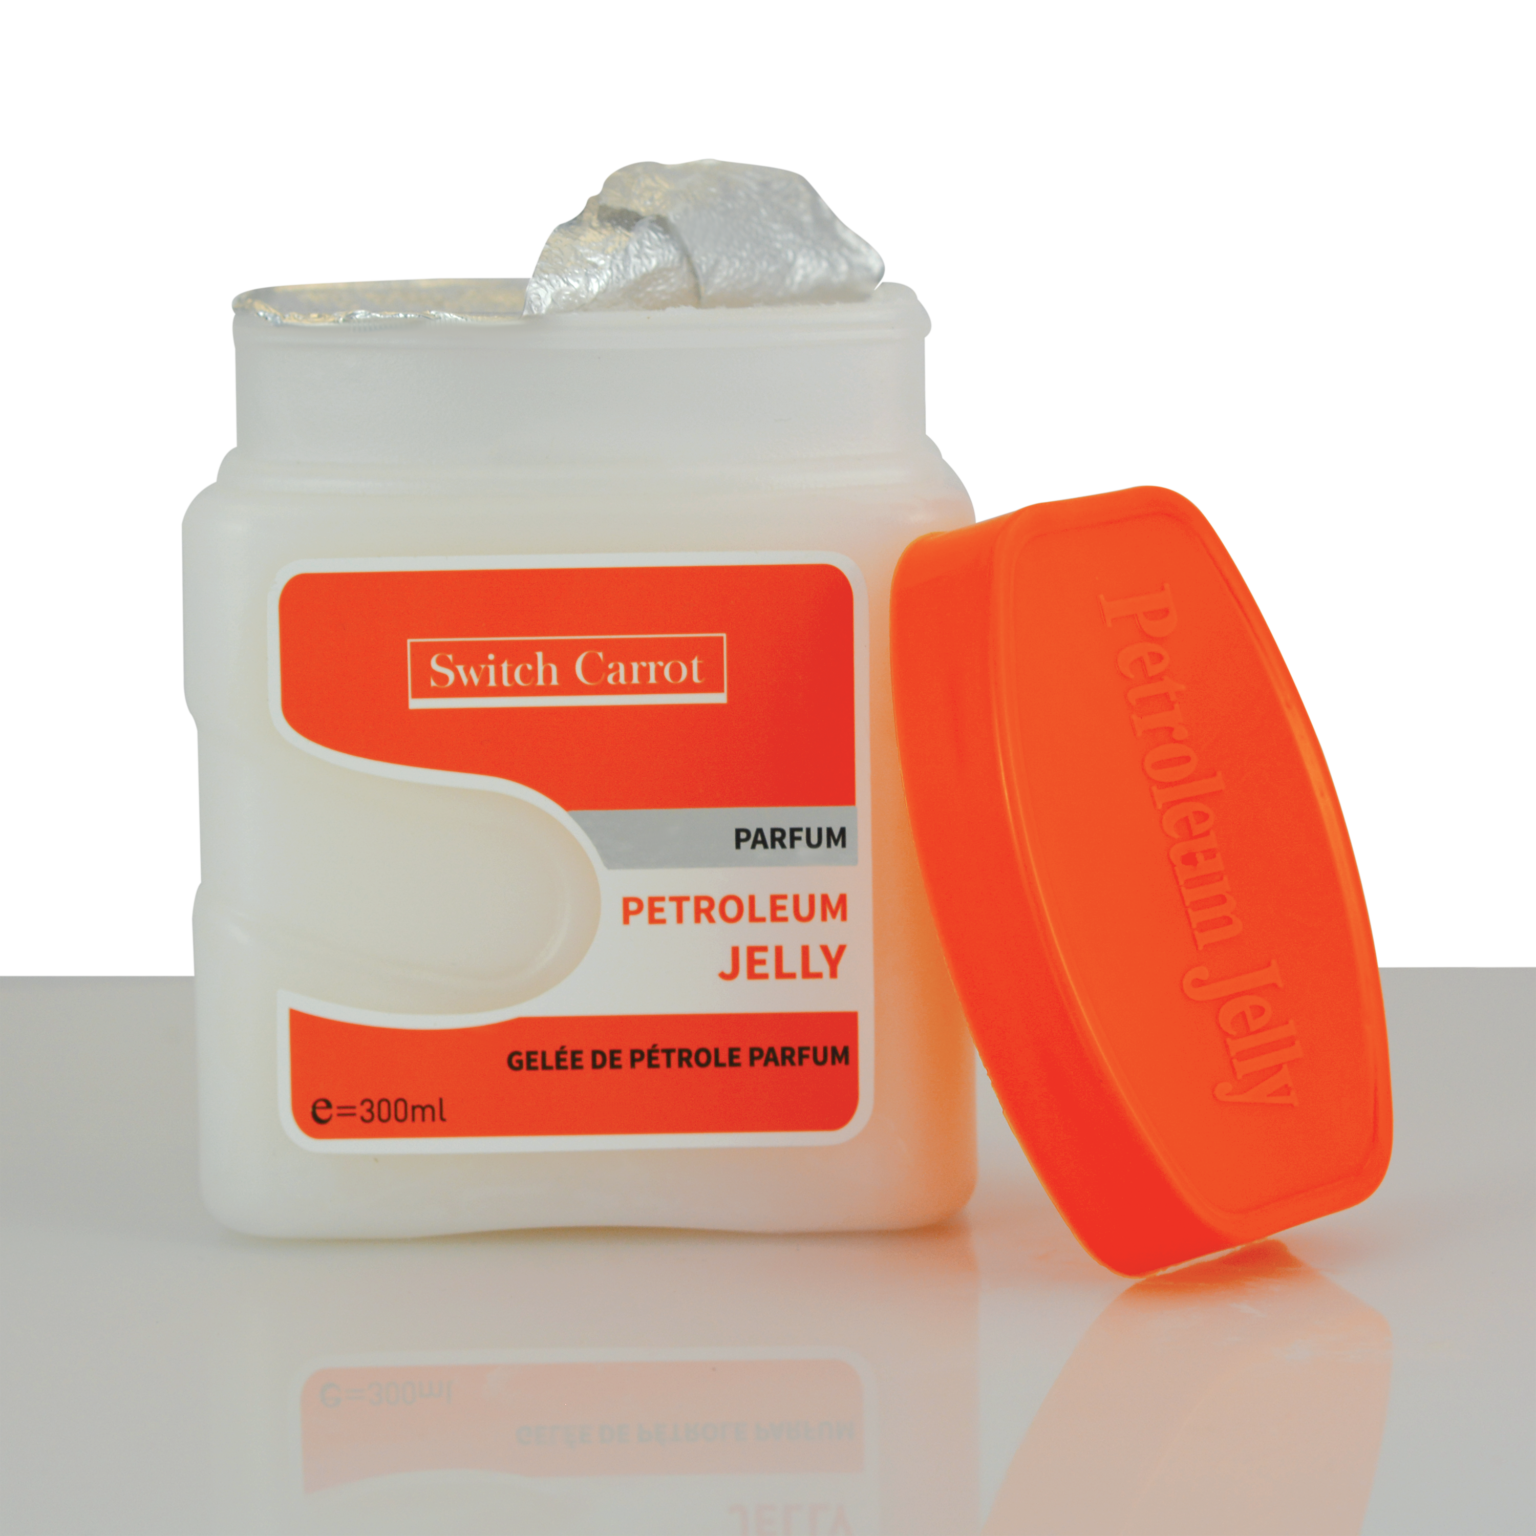 Switch Carrot Petroleum Jelly